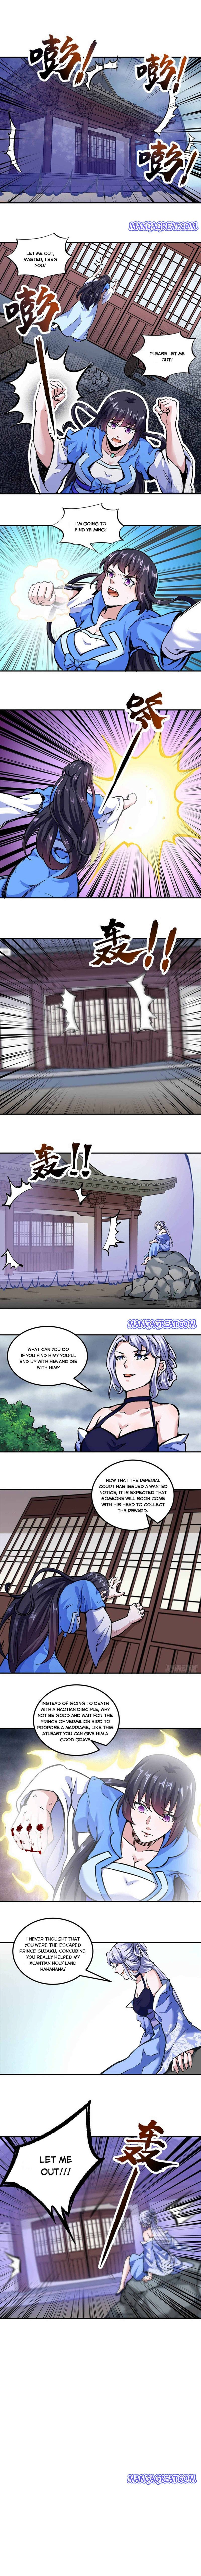 Martial Arts Reigns Chapter 296 page 3